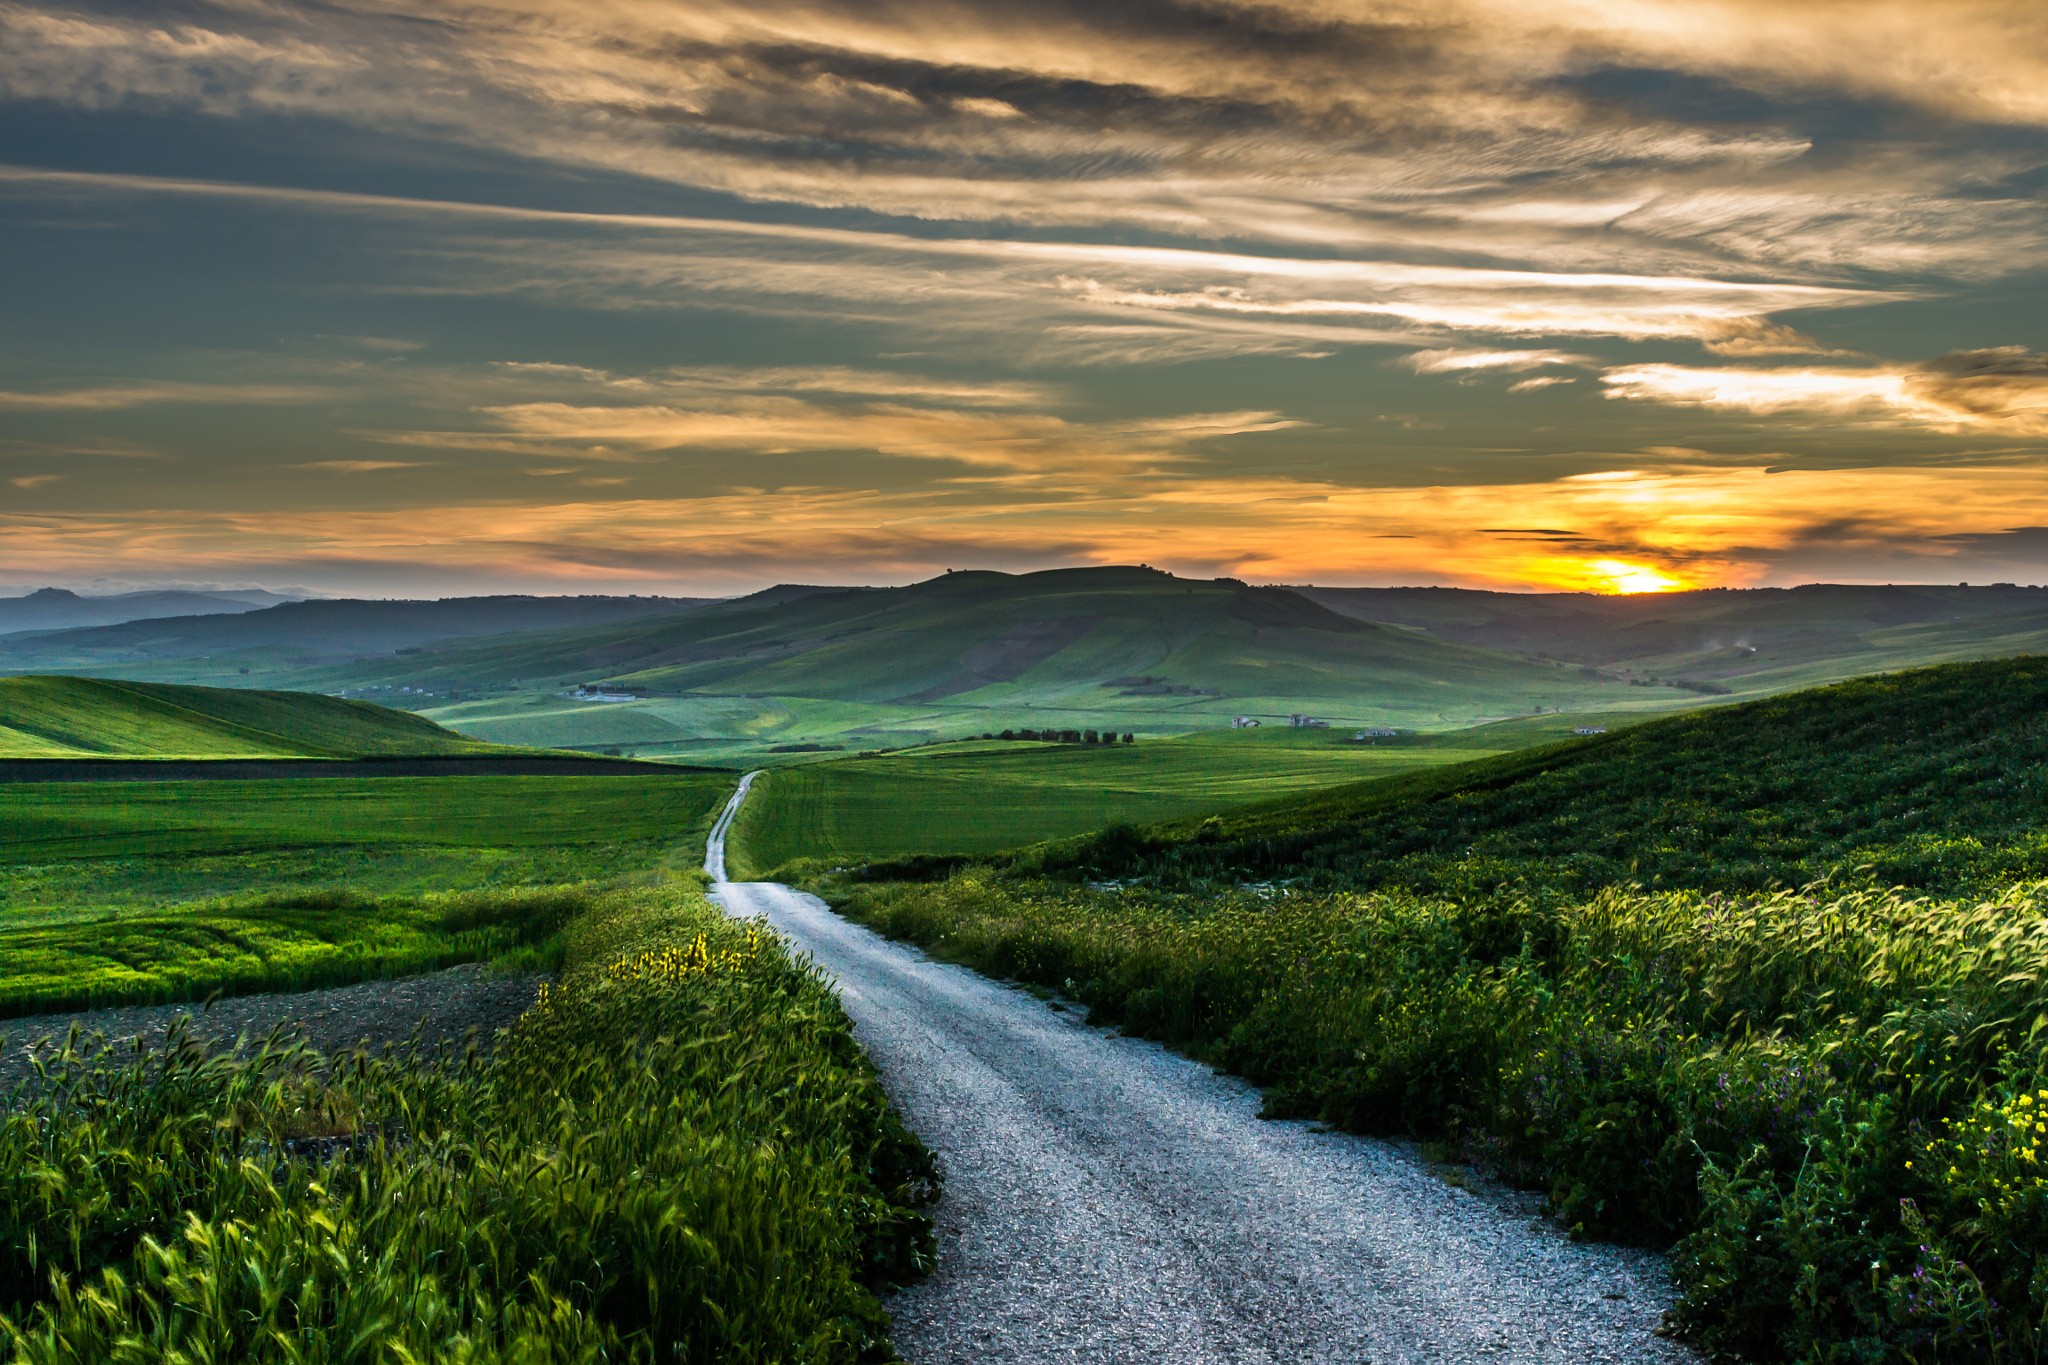 General 2048x1365 road sunset field Italy clouds grass mountains wildflowers green landscape nature long road